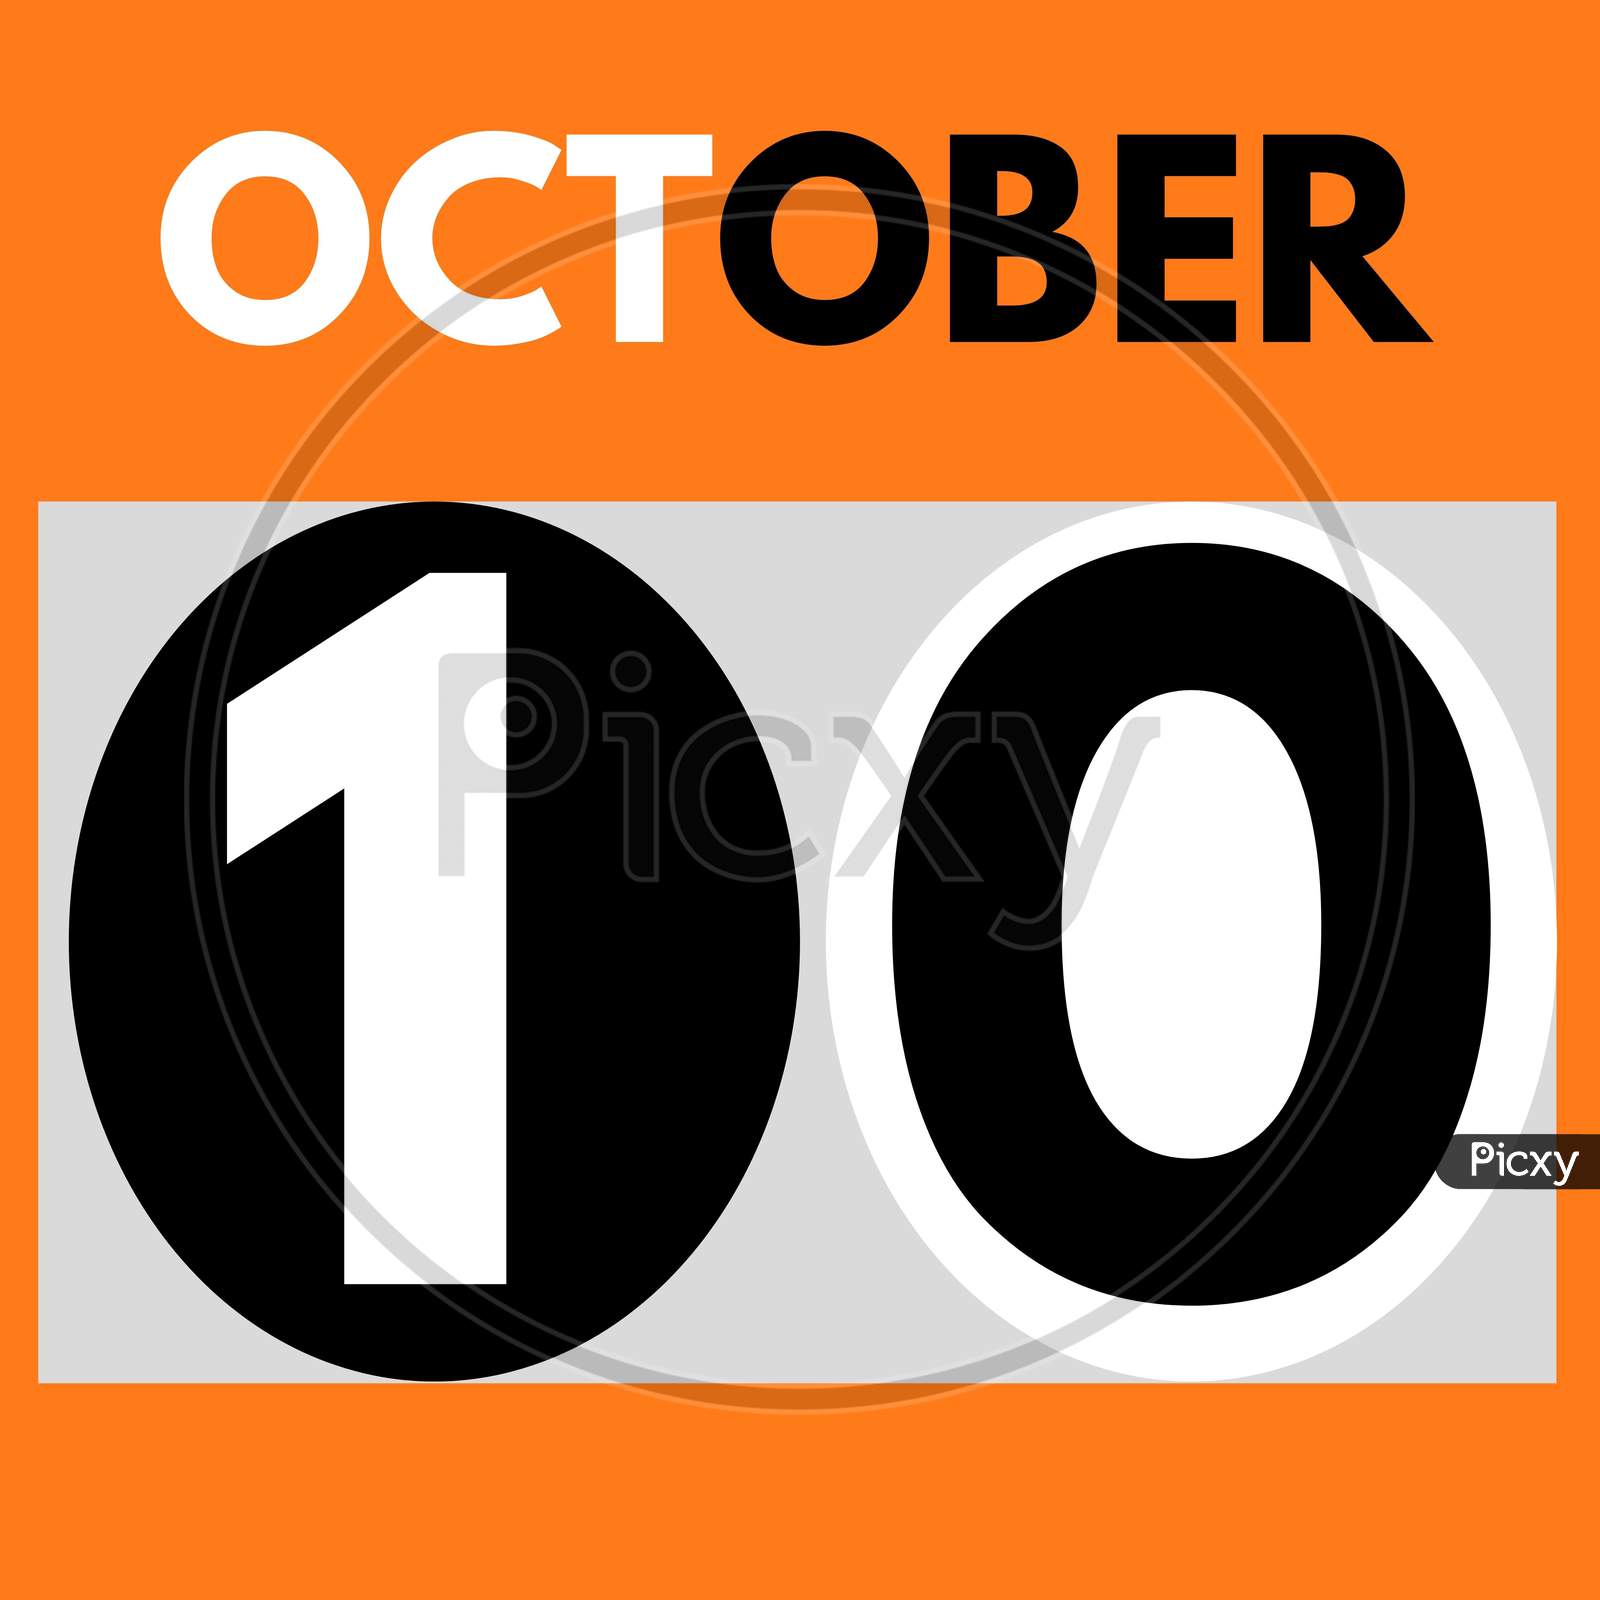 October 10 . Modern Daily Calendar Icon .Date ,Day, Month .Calendar For The Month Of October